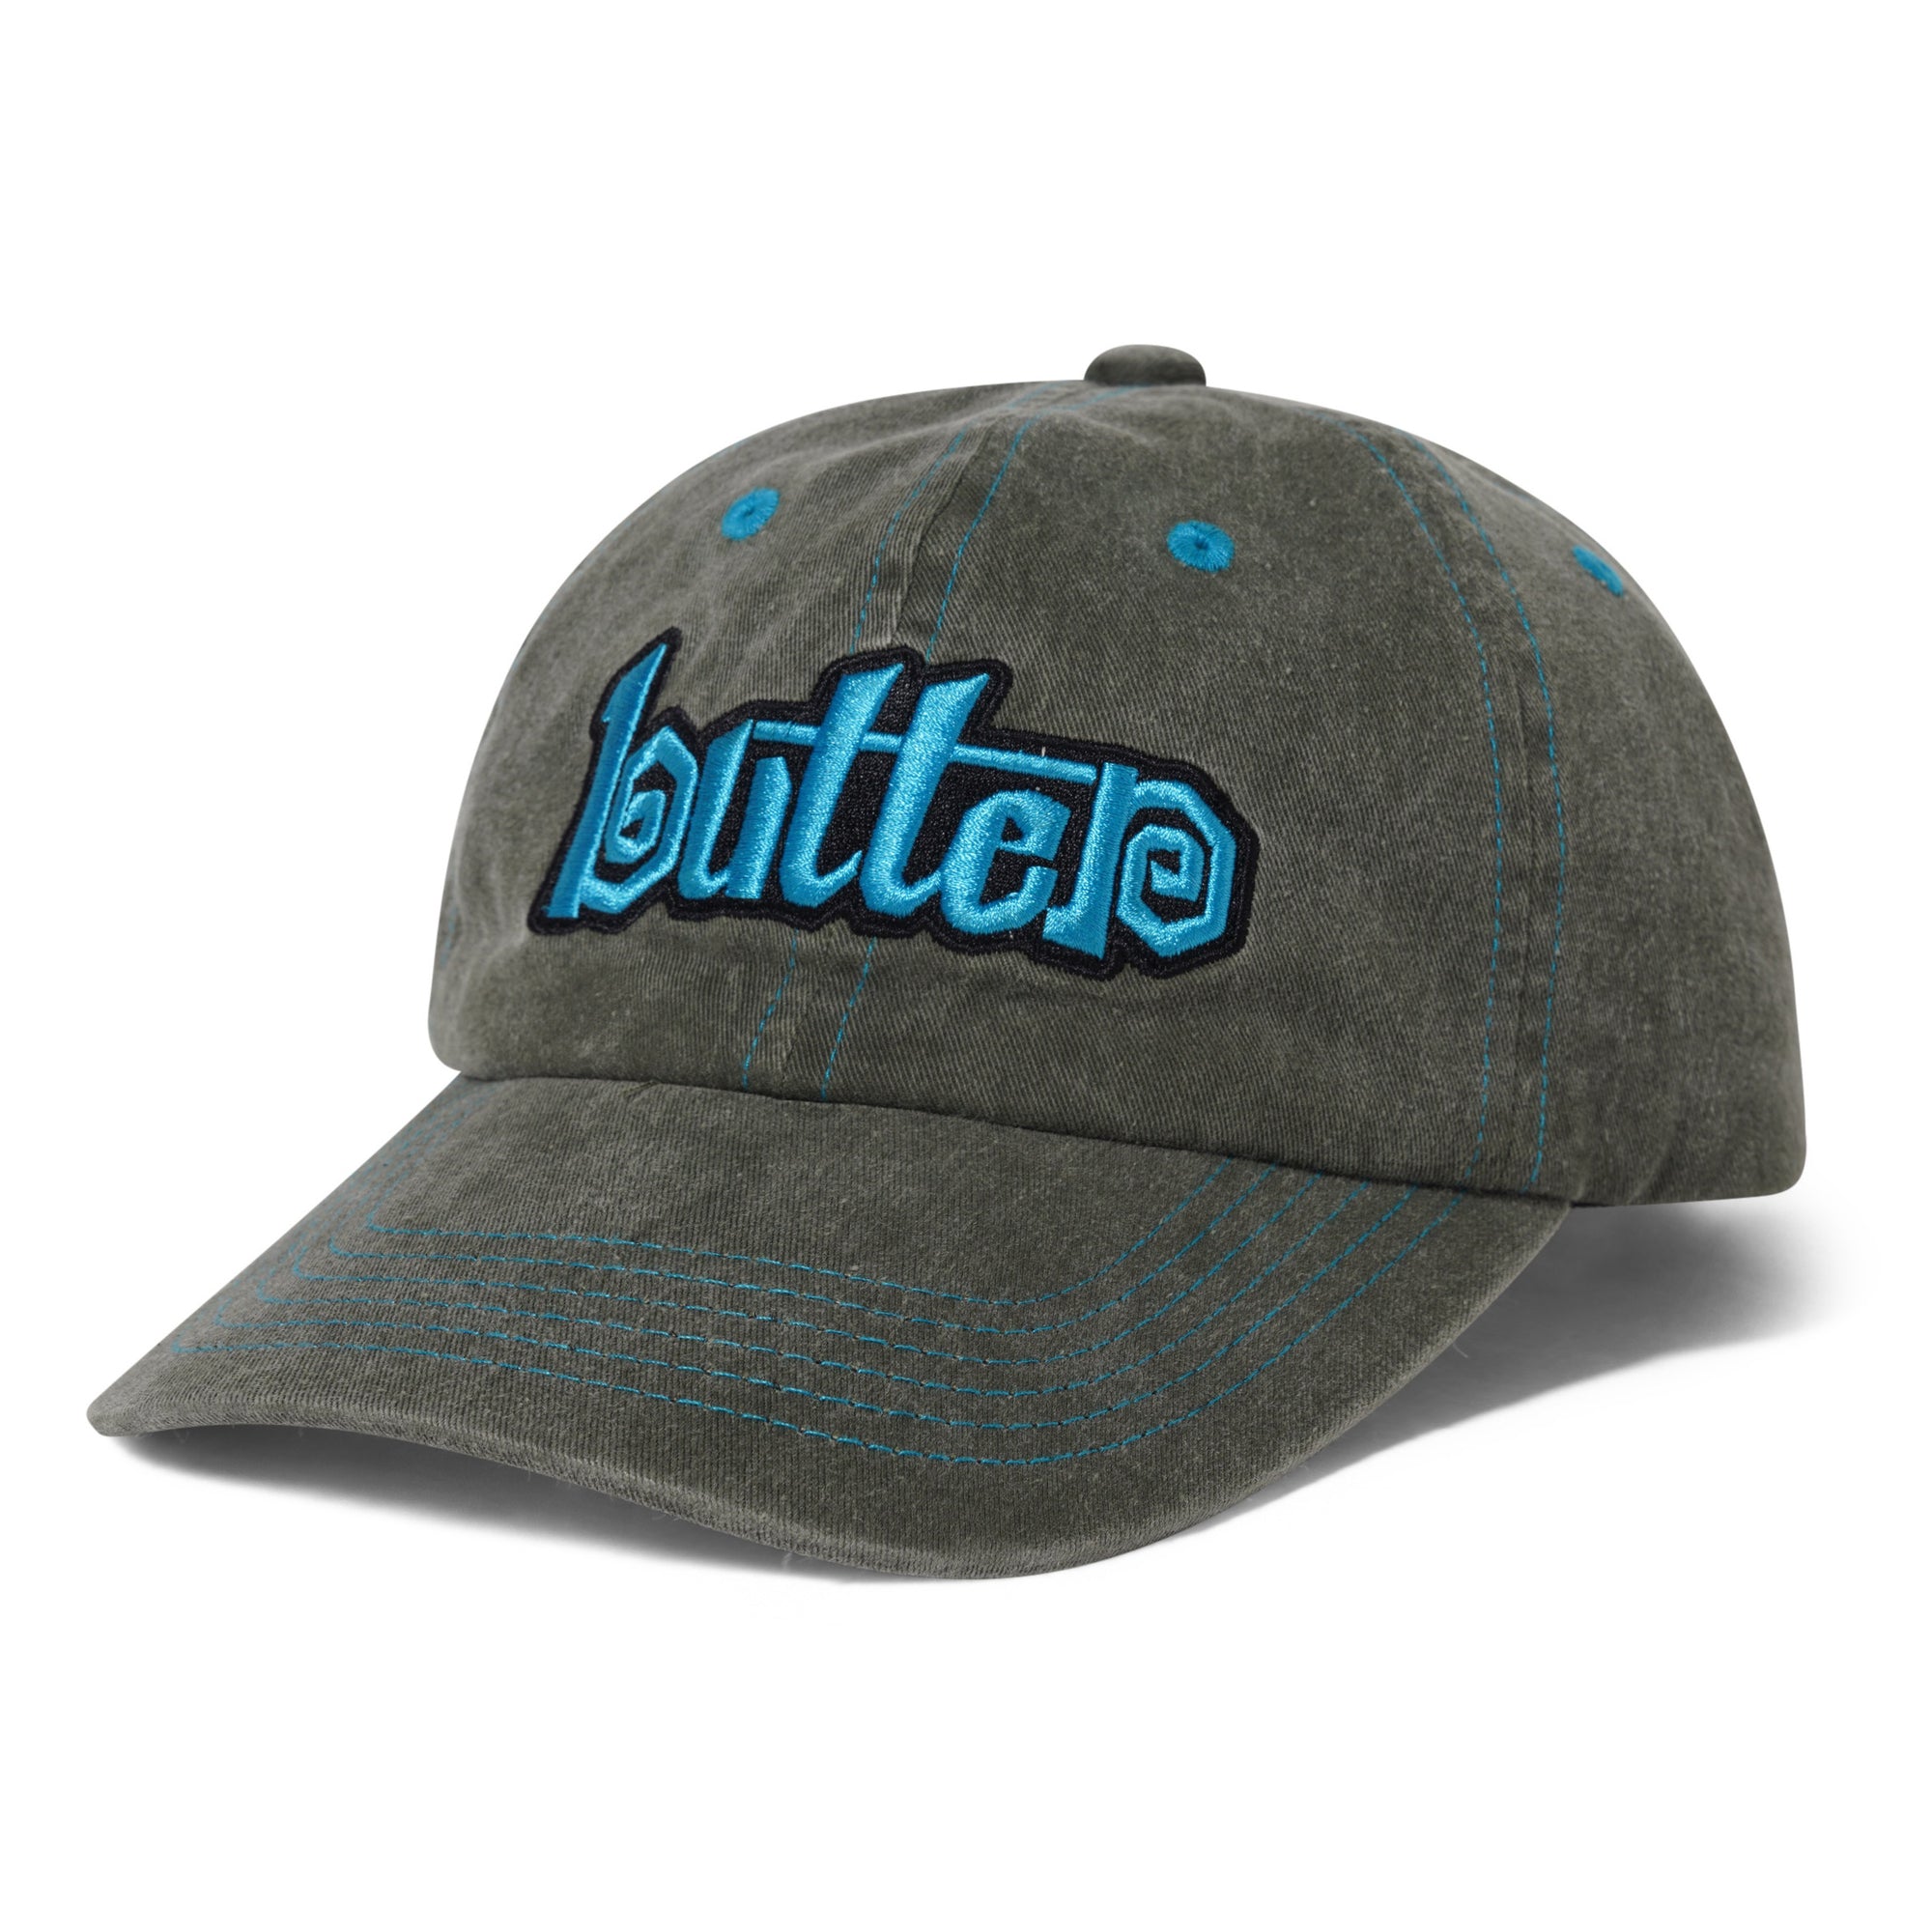 Butter Goods Swirl 6 Panel Cap Washed Foliage